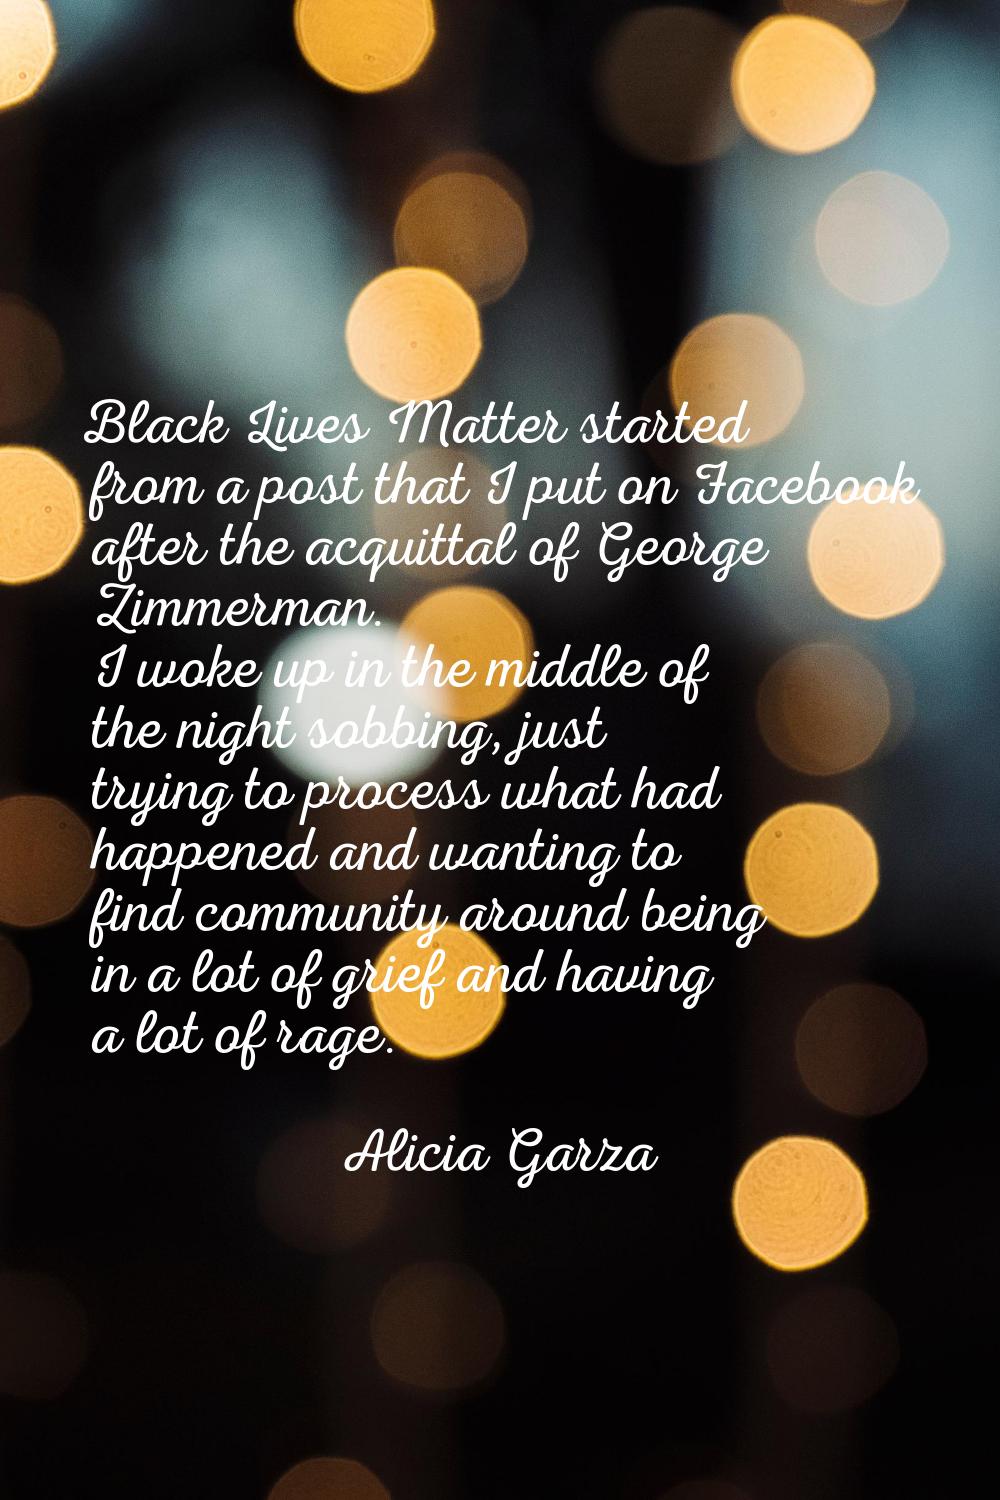 Black Lives Matter started from a post that I put on Facebook after the acquittal of George Zimmerm